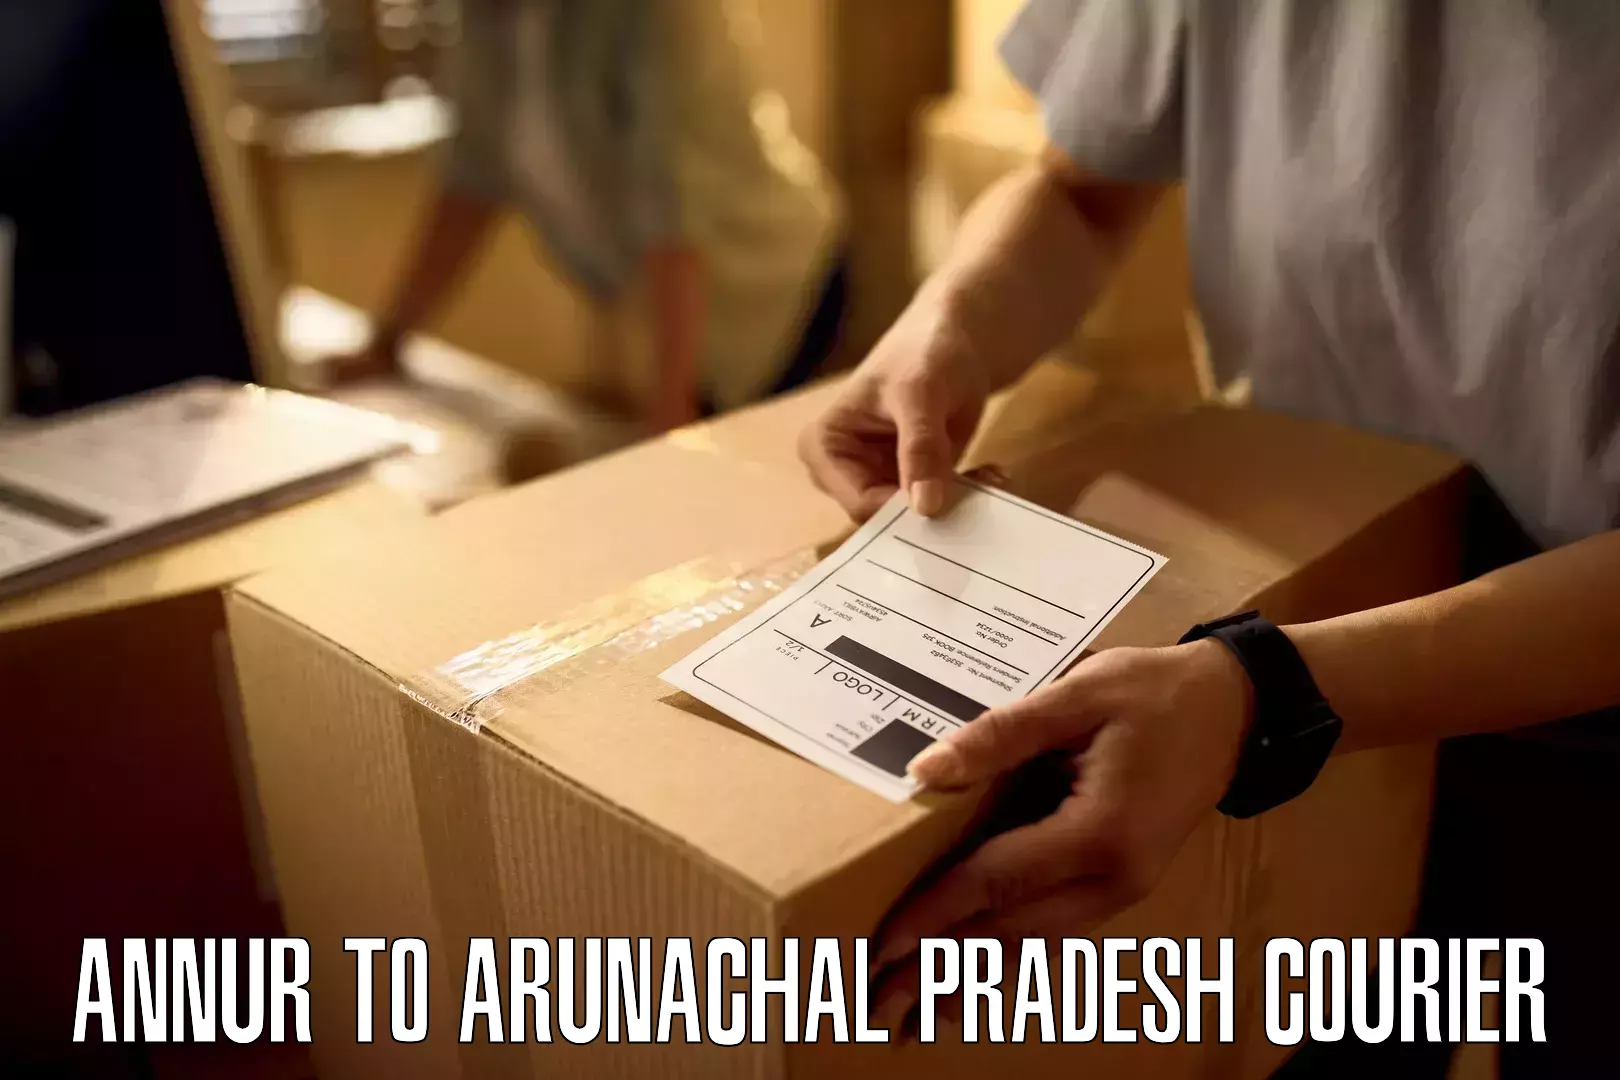 Multi-national courier services Annur to Deomali